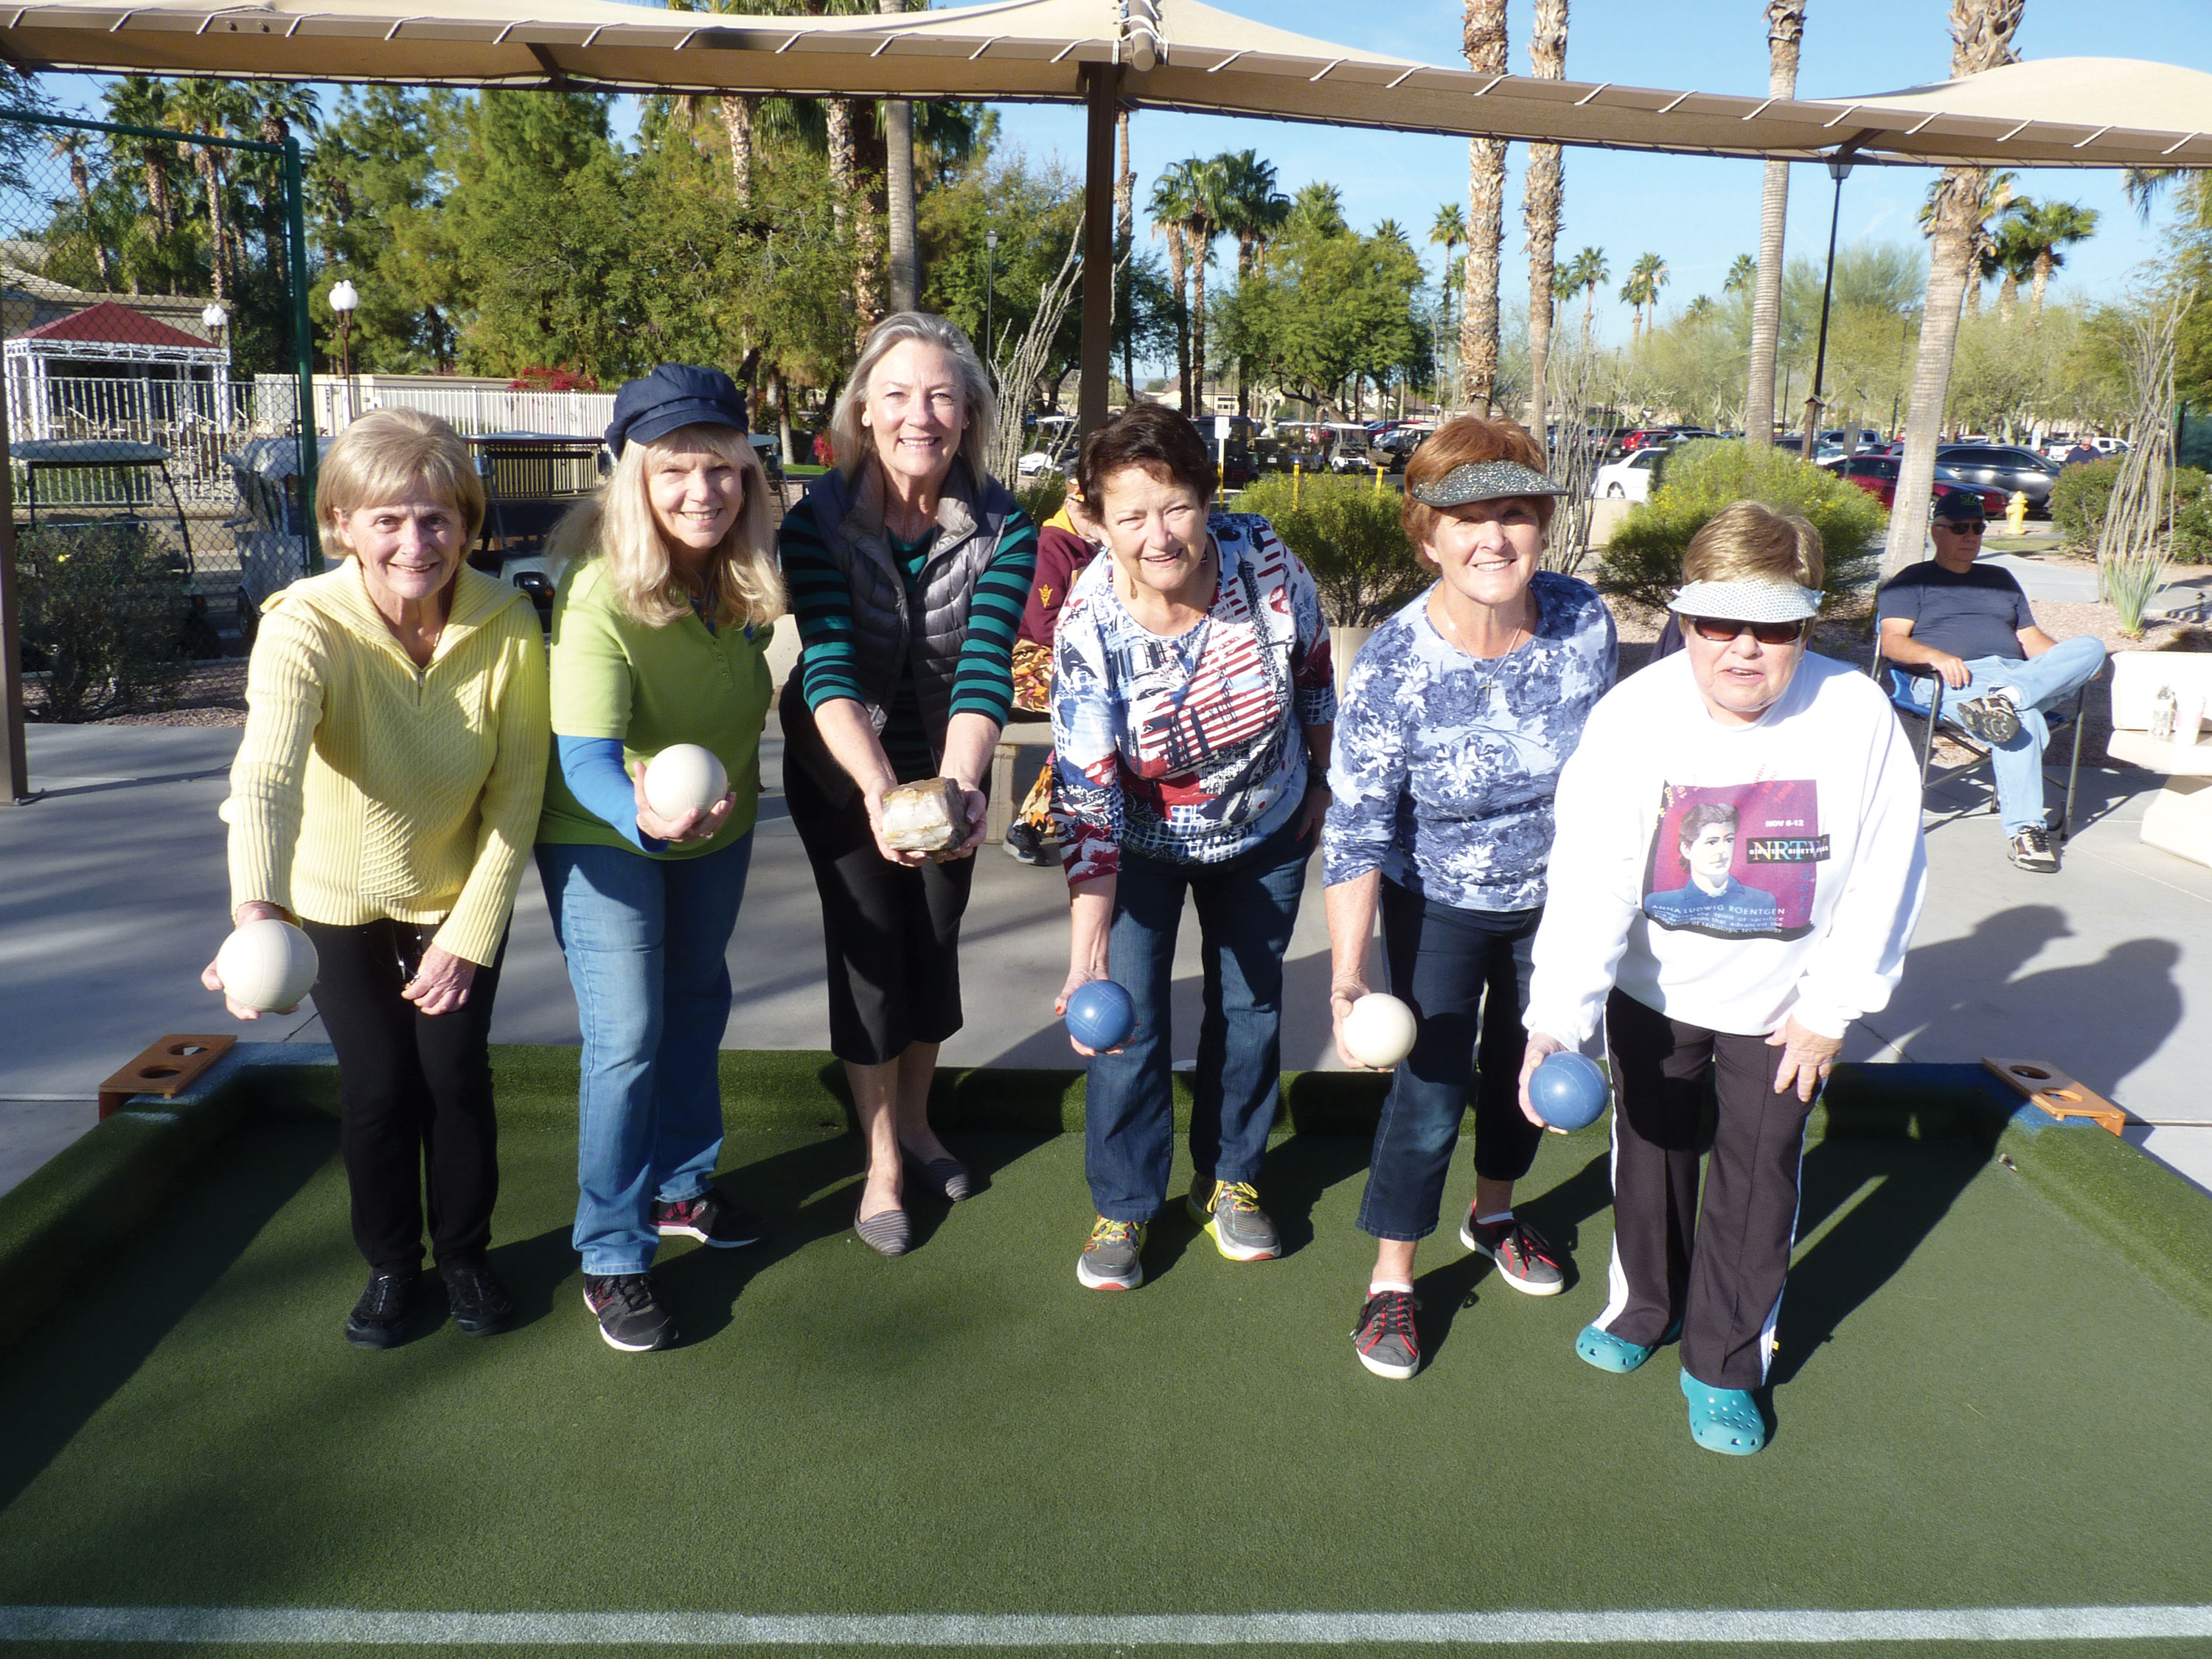 Ready to rock ‘n roll for charity are some of the female members of the PebbleCreek Bocce Association who will be participating in the organization’s first annual Ladies Bocce Ball Tournament for Charity on Saturday, March 4. All proceeds will benefit the New Life Center in Goodyear. Left to right are Muriel Milewski, Mary Ann Evans, Millissa Masters, Priscilla Naworski, Faye Ralph and Carol Gwilt; photo by Roger Milewski